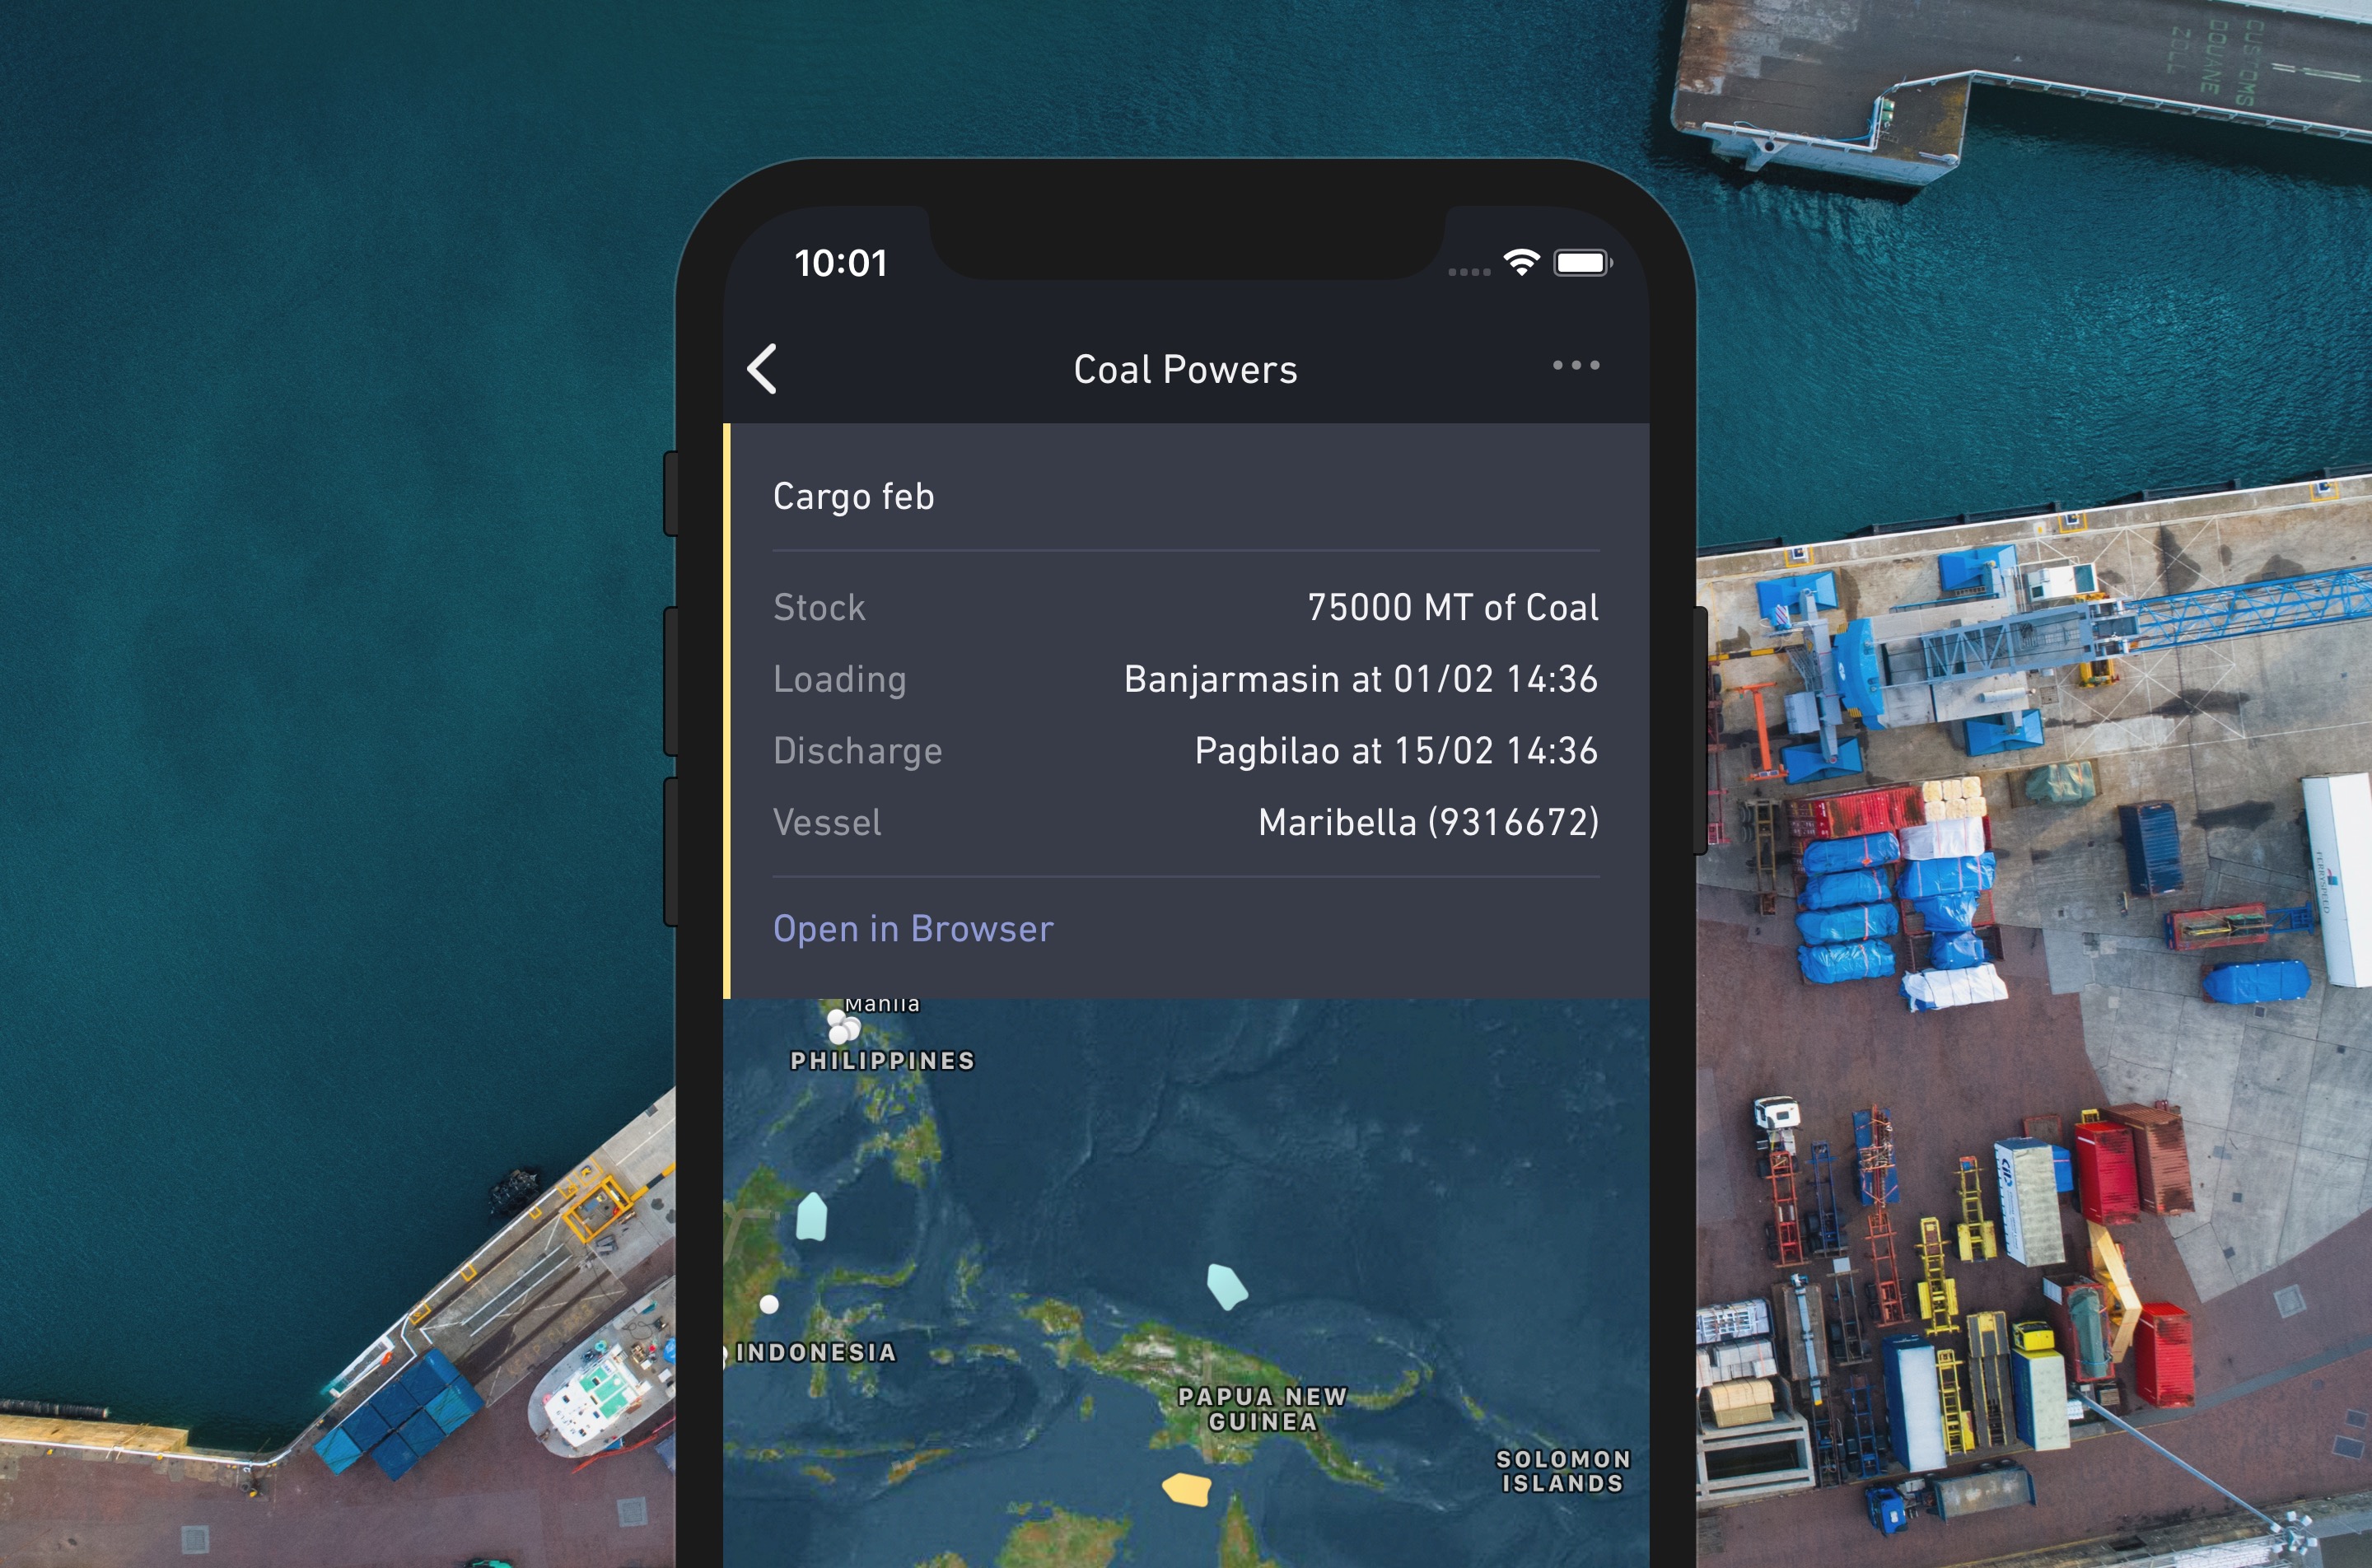 Cargo mobile app showing details and a map for a shipment